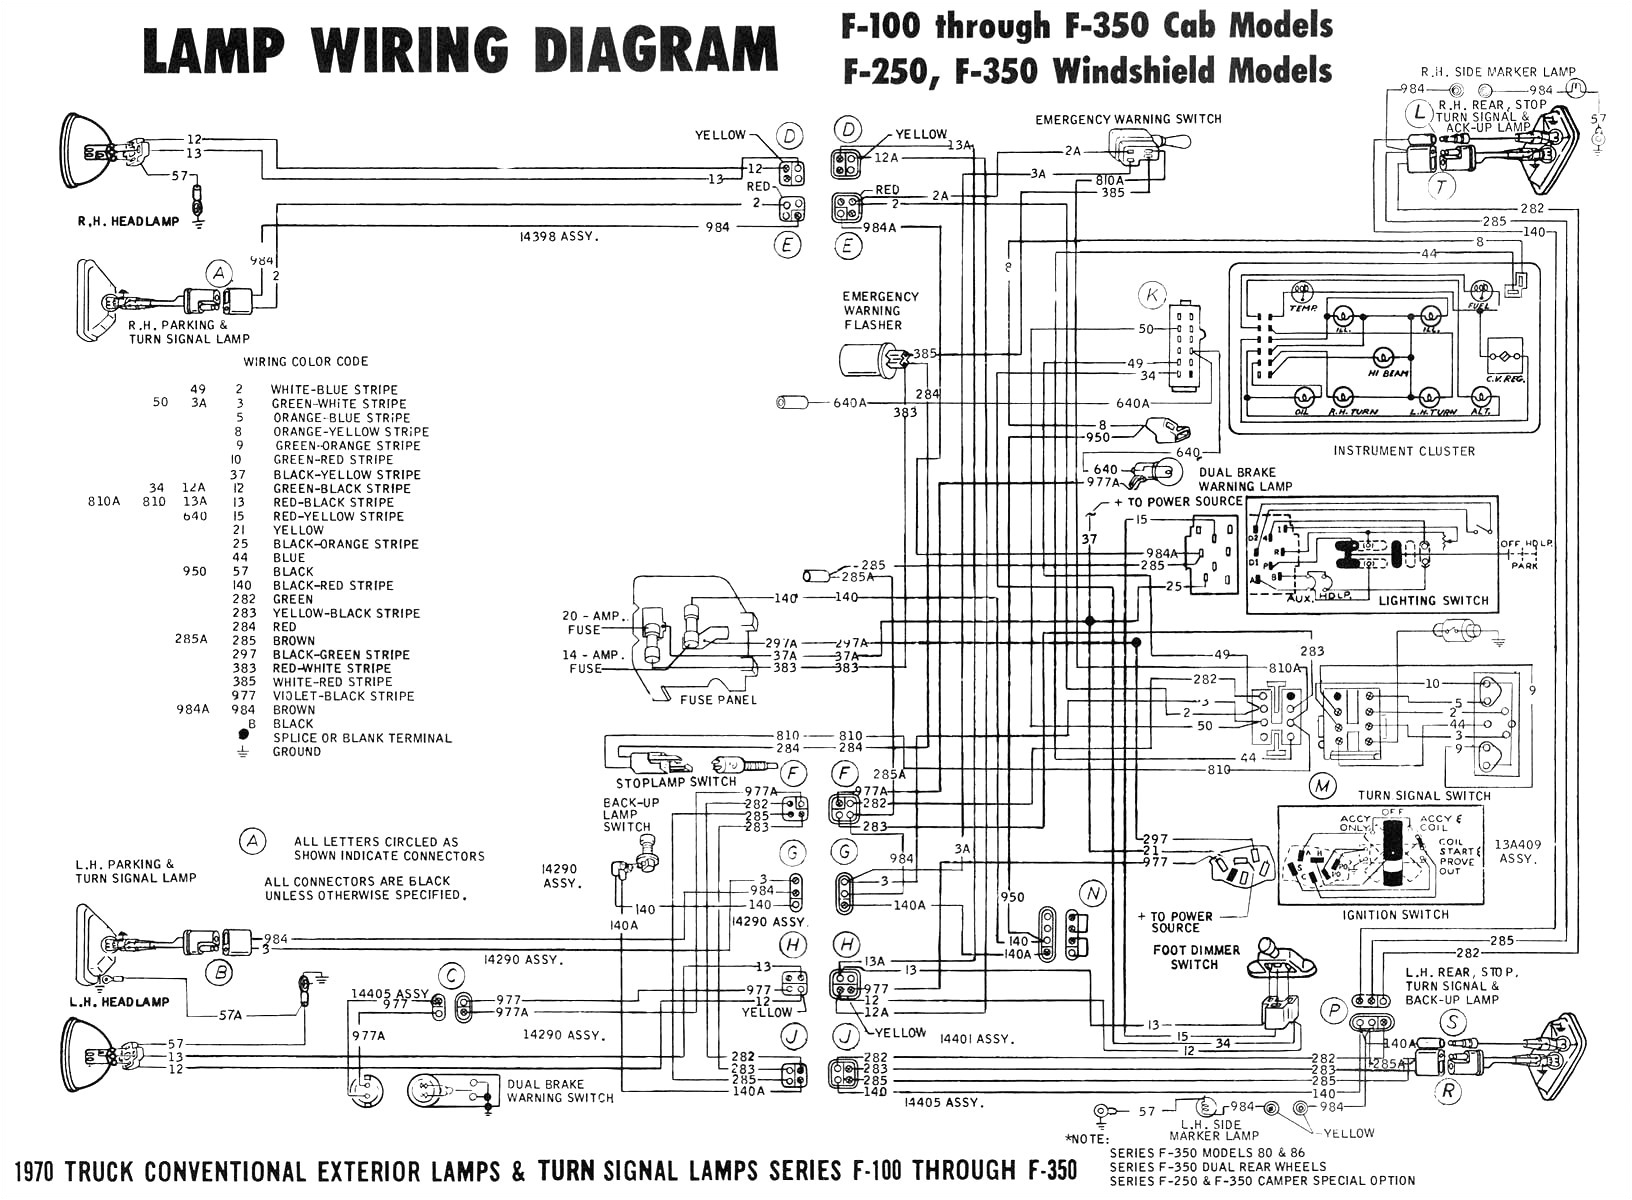 1997 ford F150 Fuel Pump Wiring Diagram ford F 250 Front Suspension Diagram 1997 ford F 150 Fuel Pump Relay